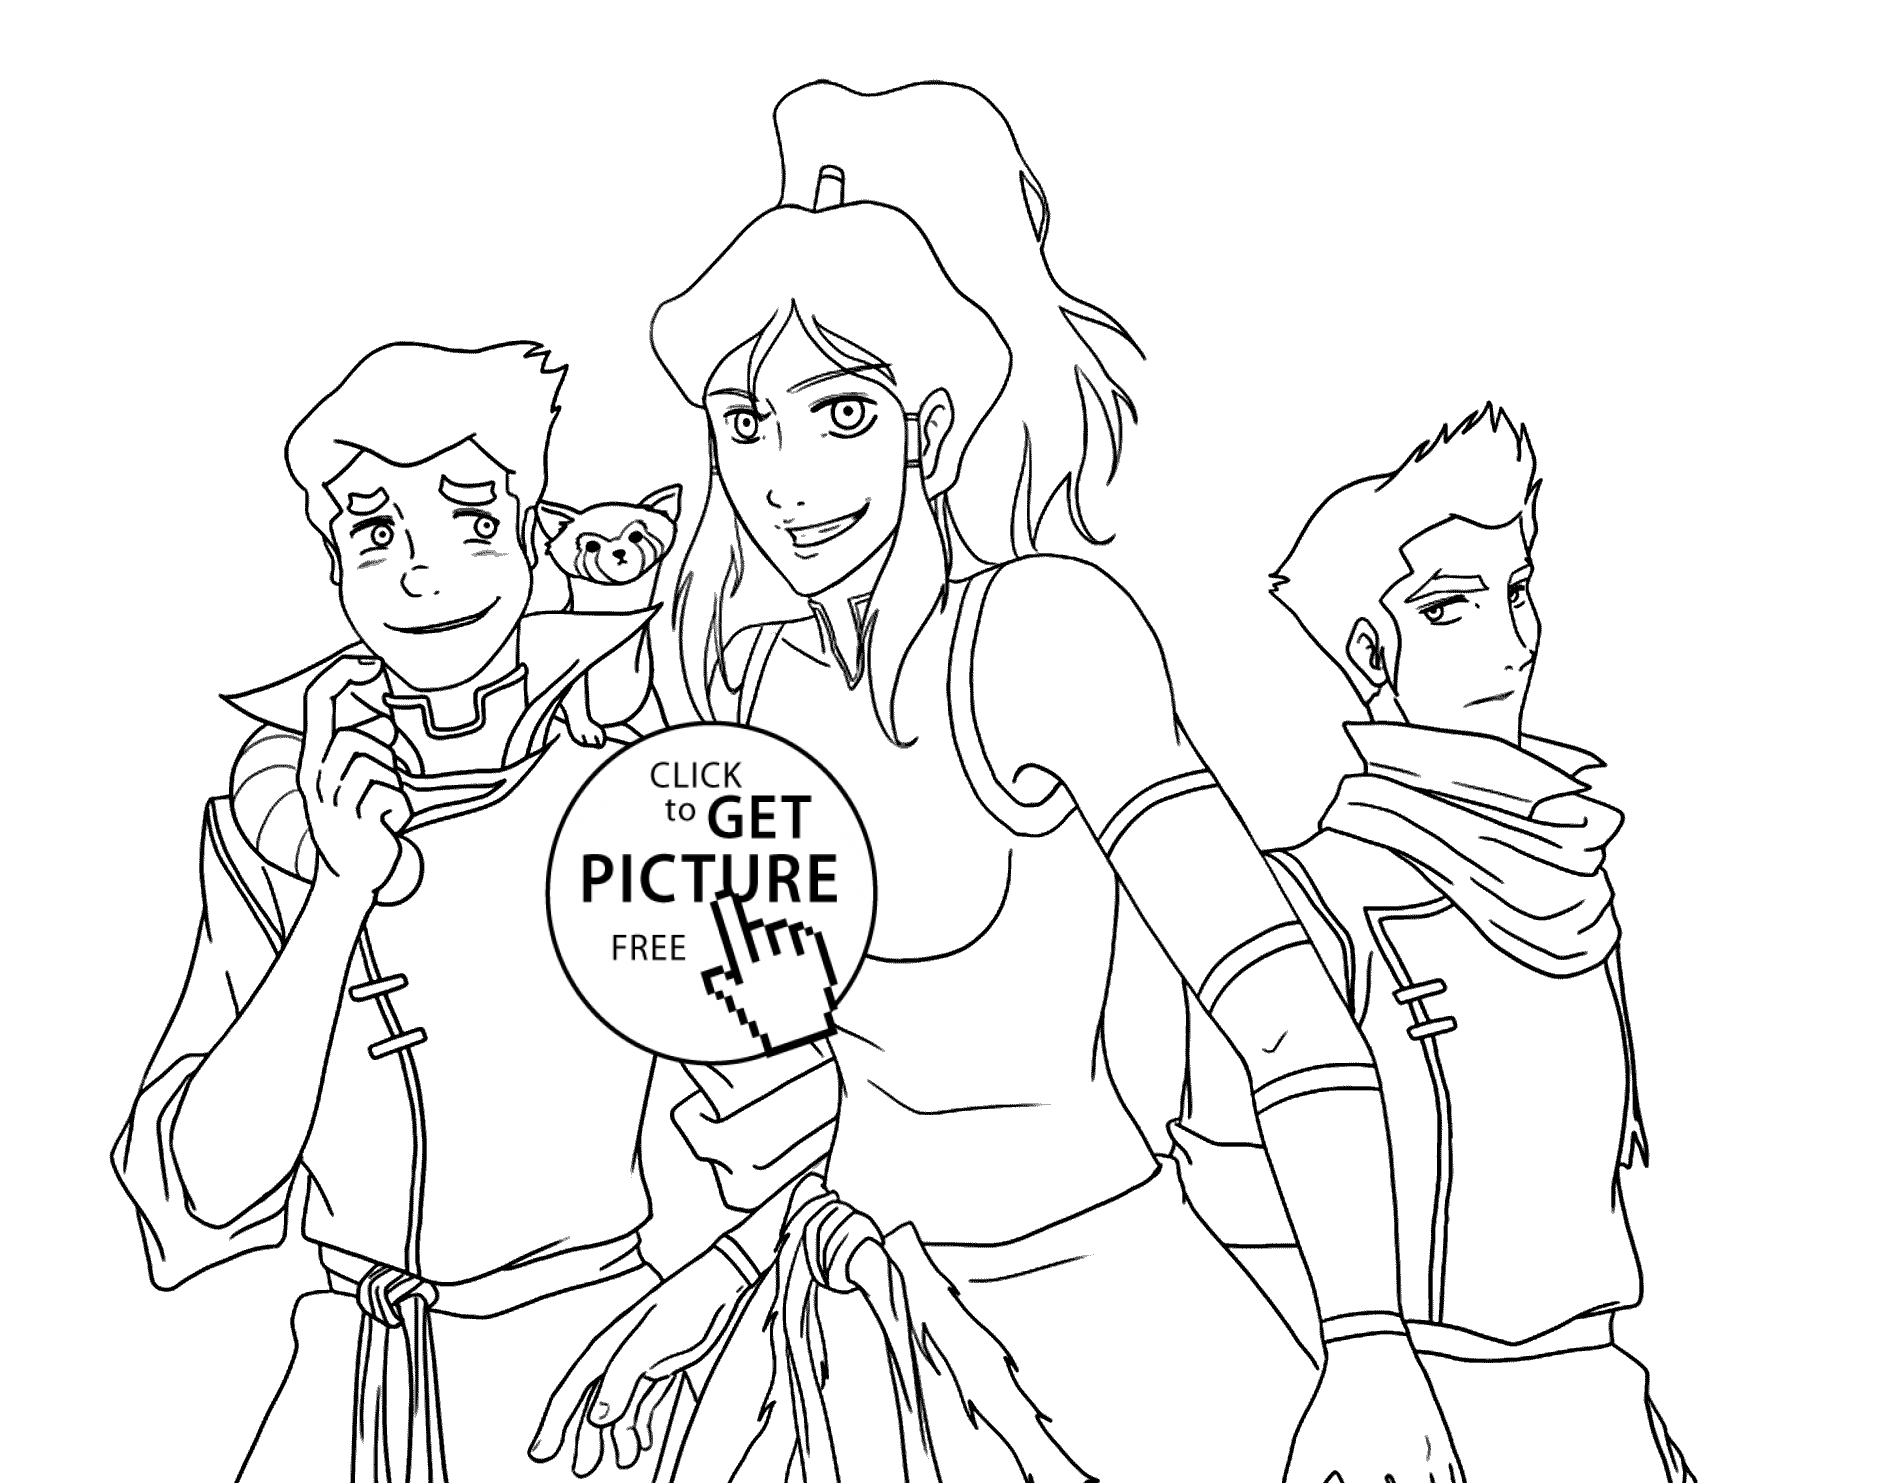 Korra and friends| Coloring Pages for Kids, printable free 